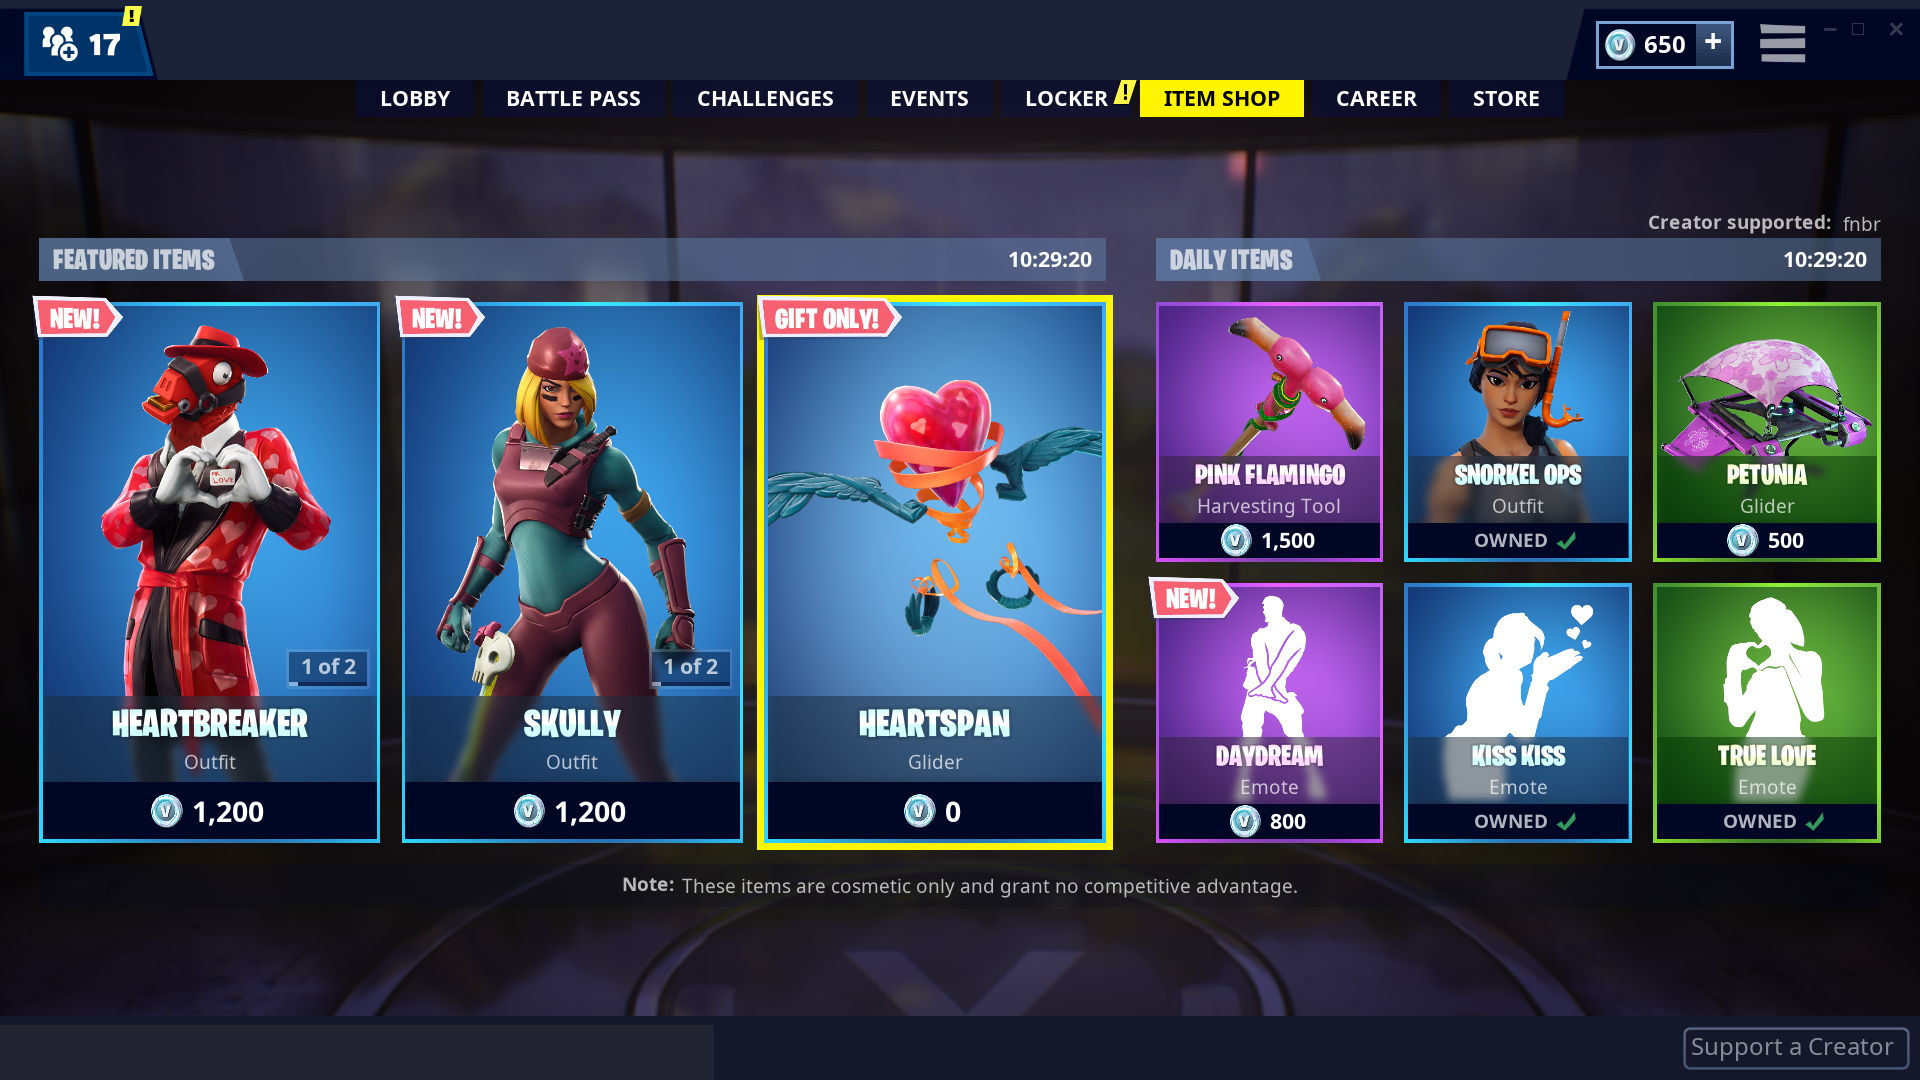 head to the item shop tab and select the heartspan panel - fortnite free heart glider